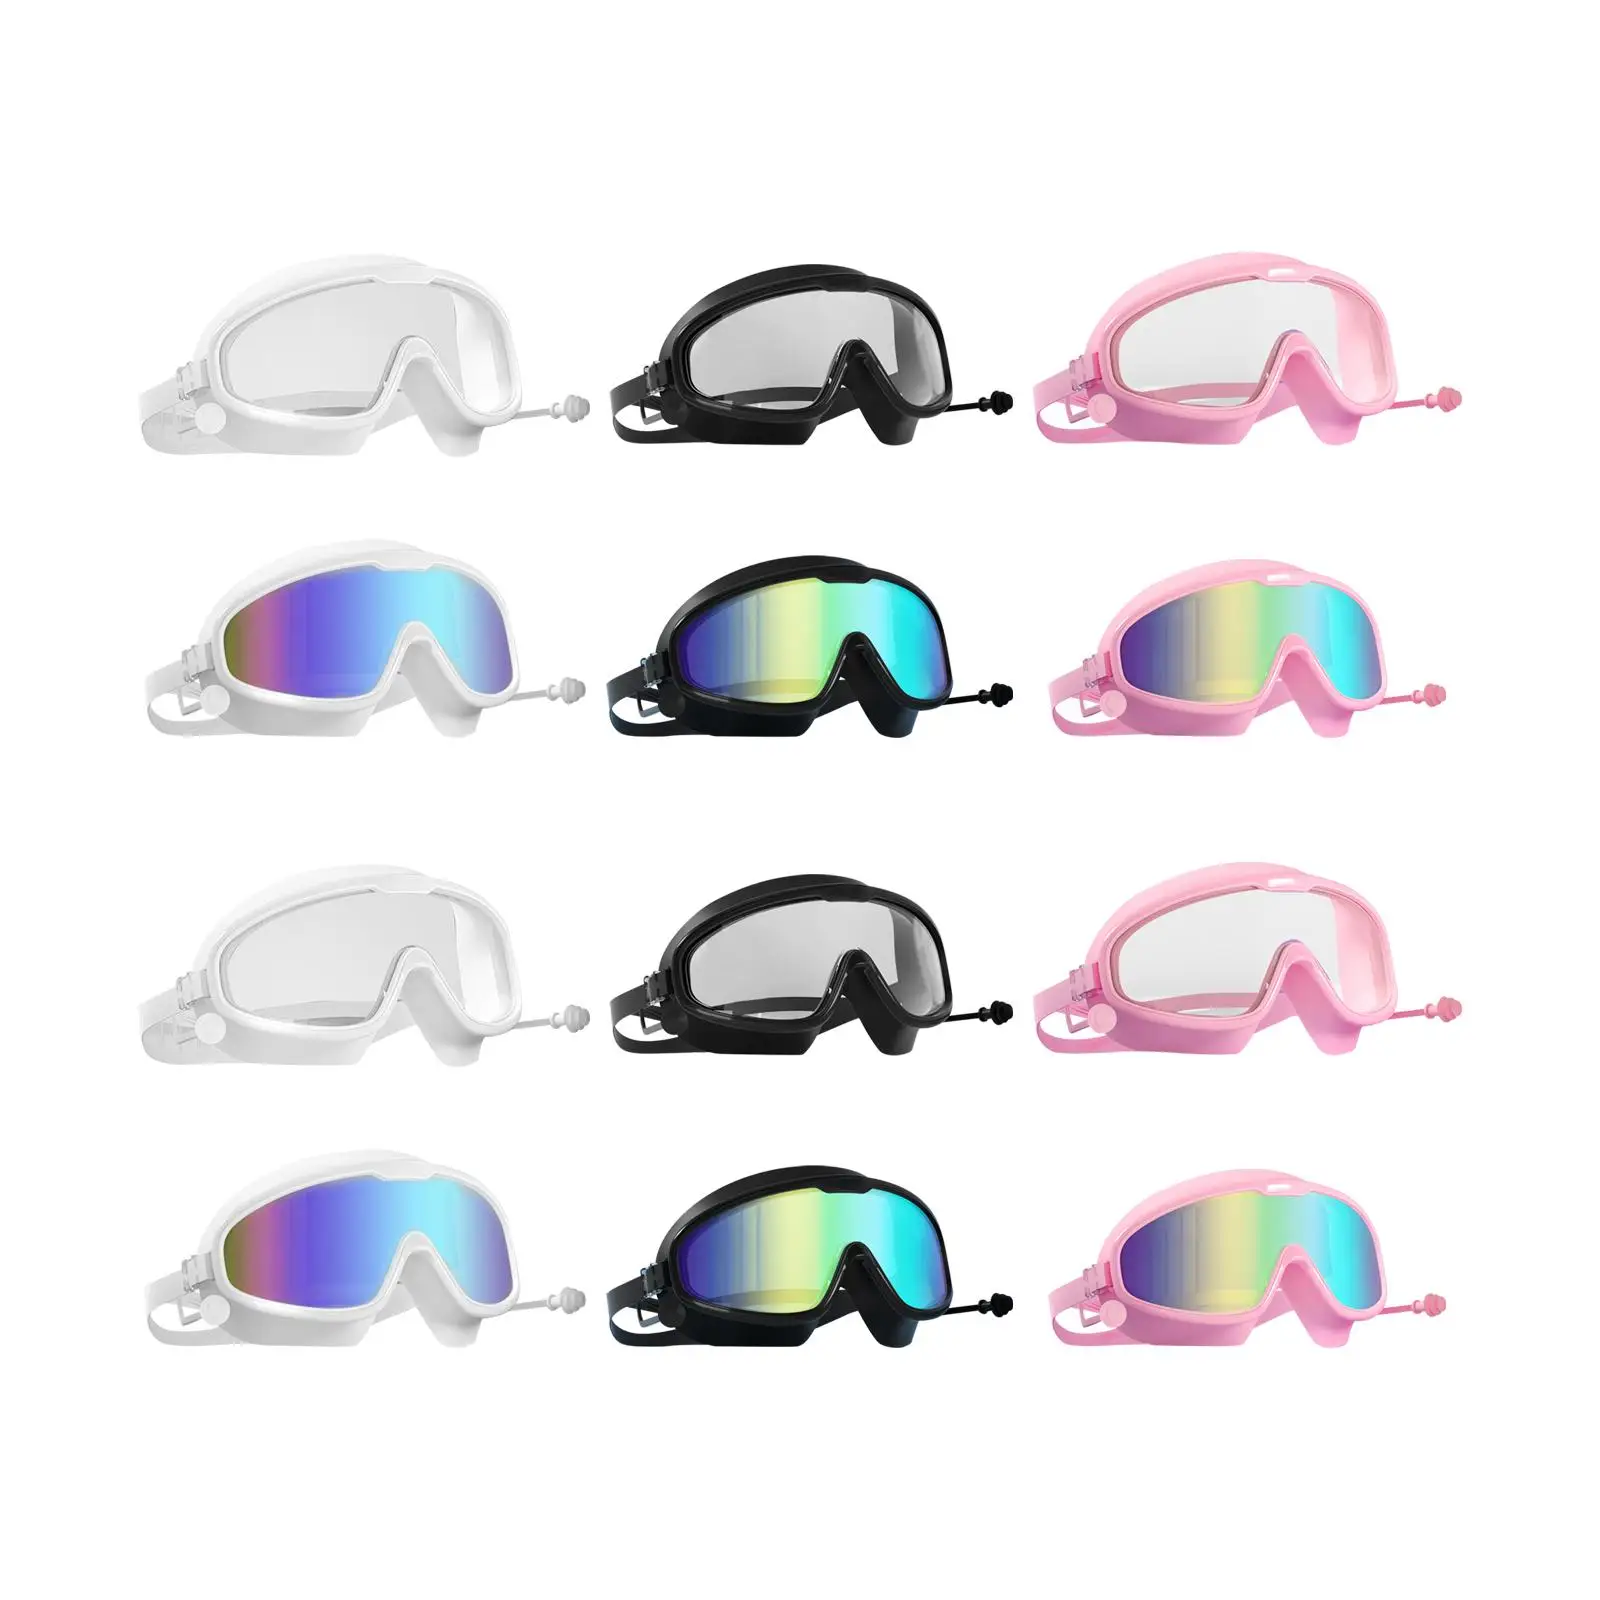 Swimming Goggles Swim Glasses Large Frame Diving Glasses with Earplugs